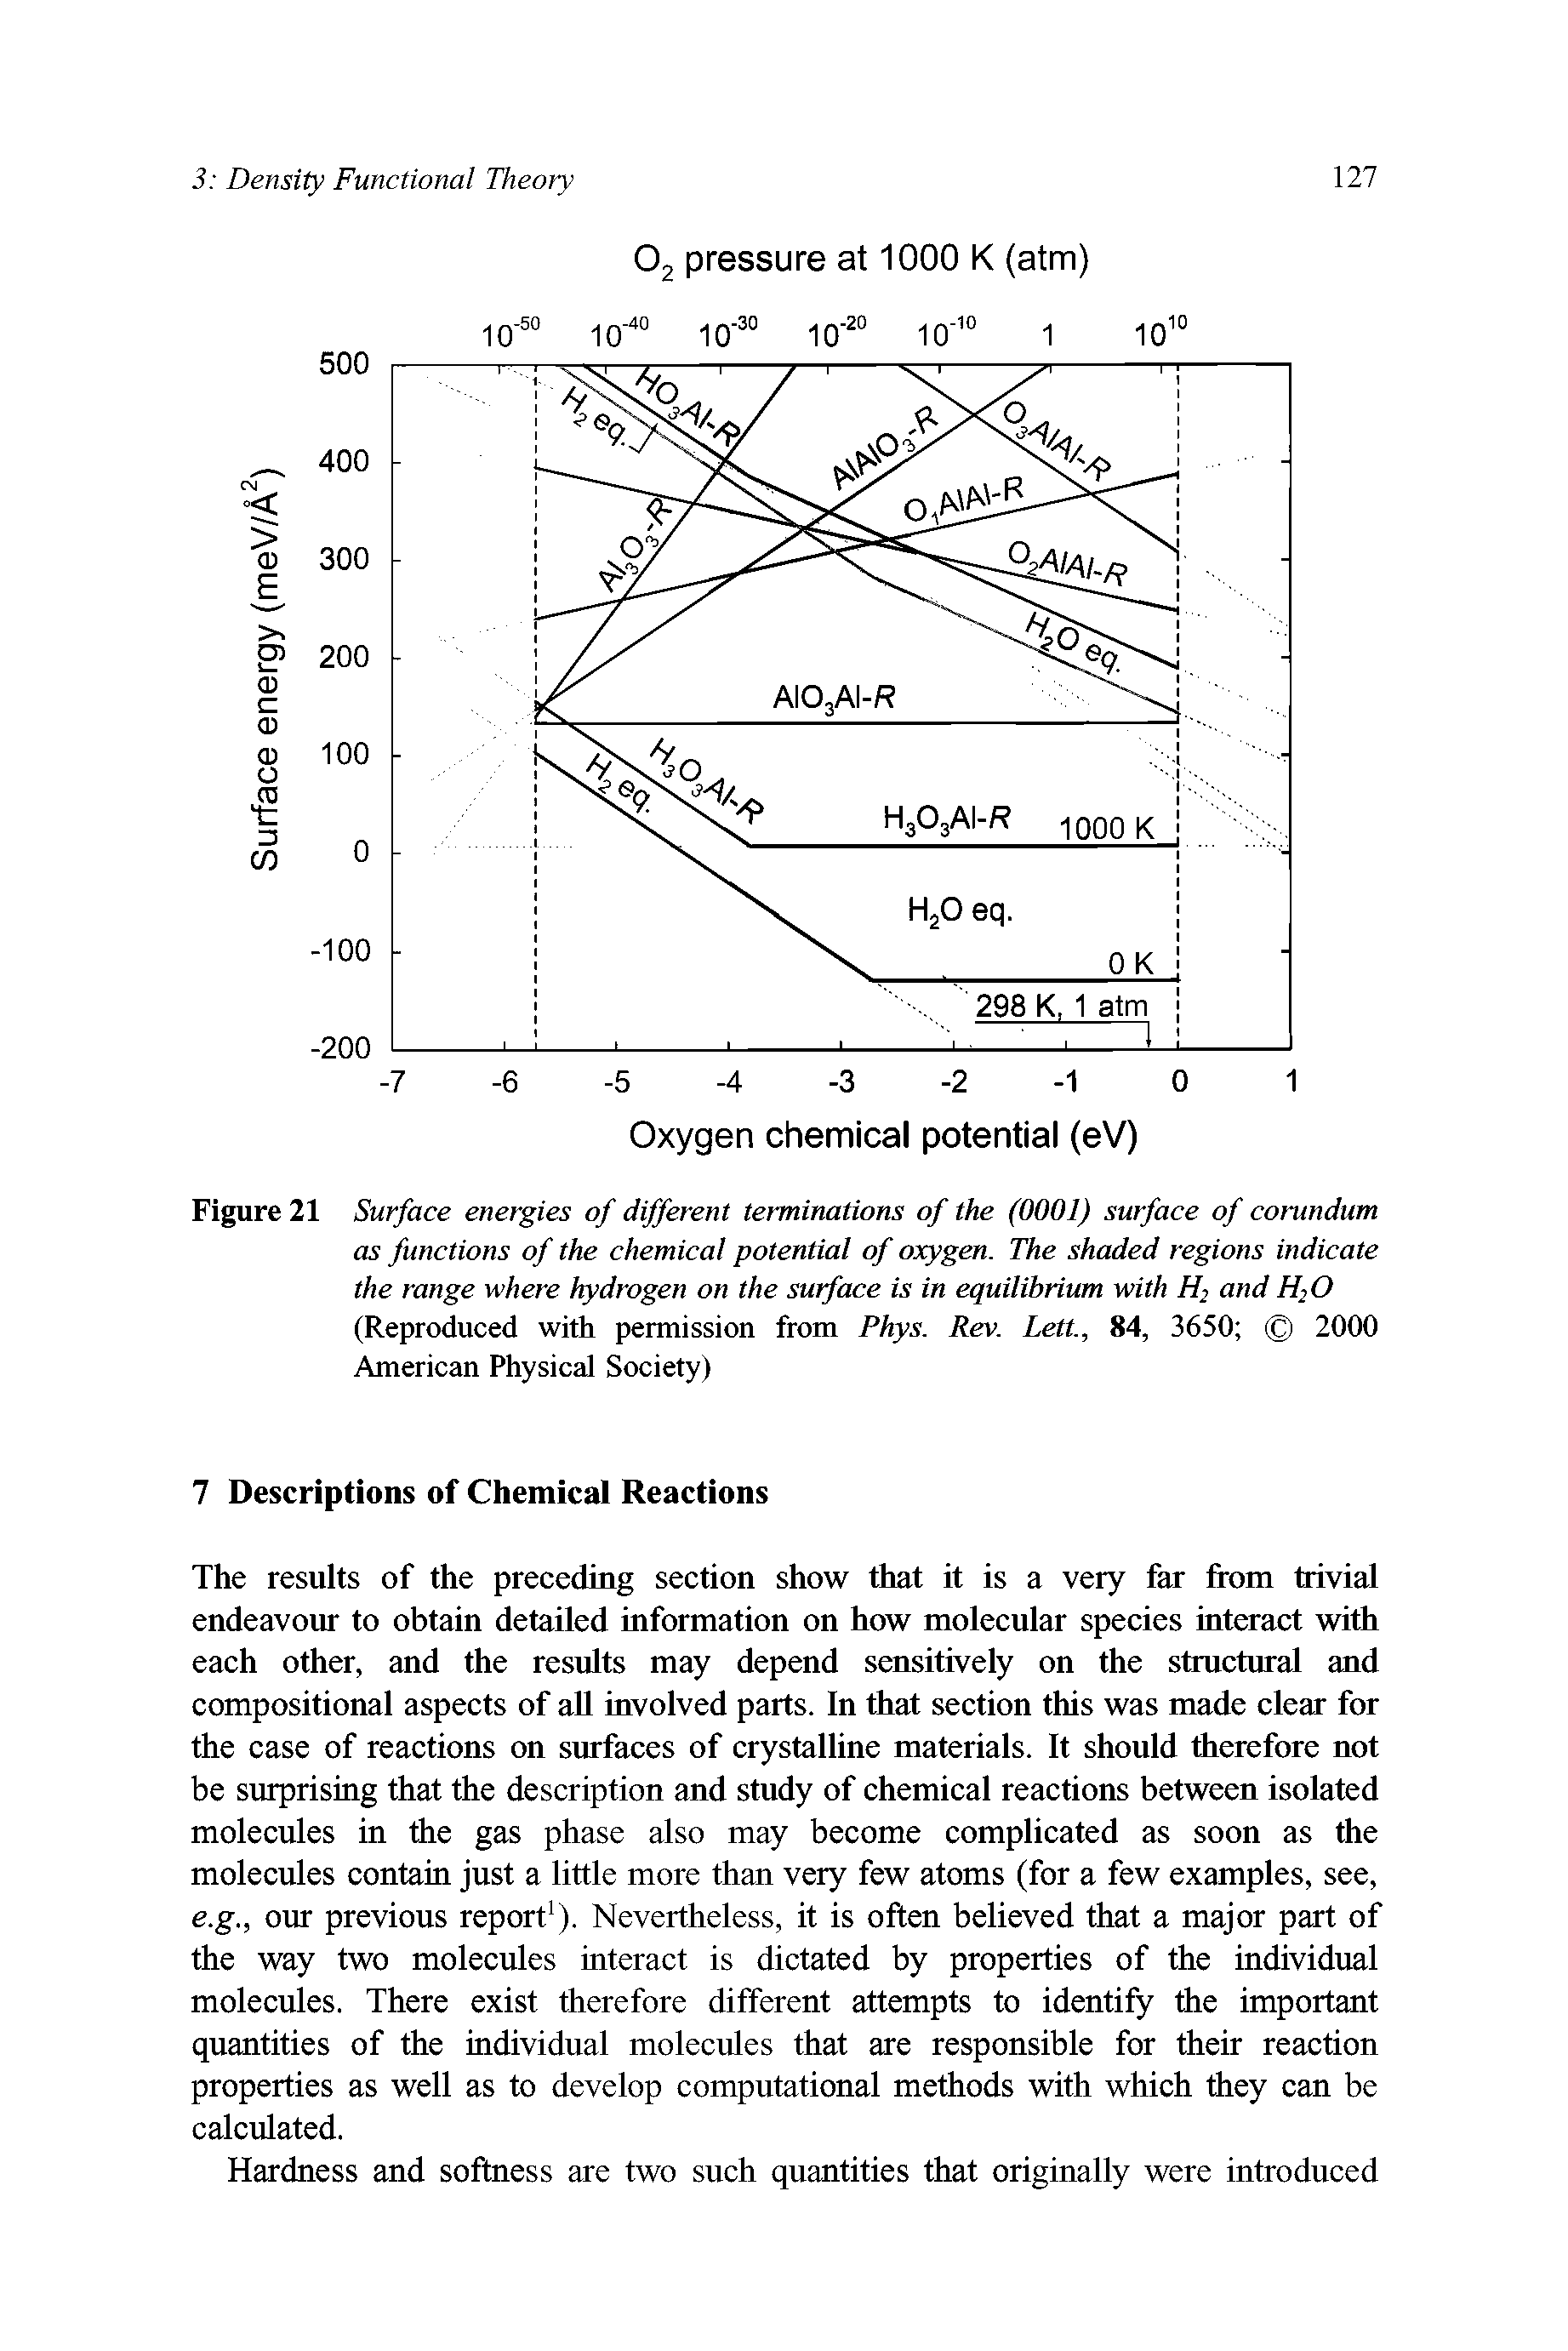 Figure 21 Surface energies of different terminations of the (0001) surface of corundum as functions of the chemical potential of oxygen. The shaded regions indicate the range where hydrogen on the surface is in equilibrium with H2 and H2O (Reproduced with permission from Phys. Rev. Lett, 84, 3650 2000 American Physical Society)...